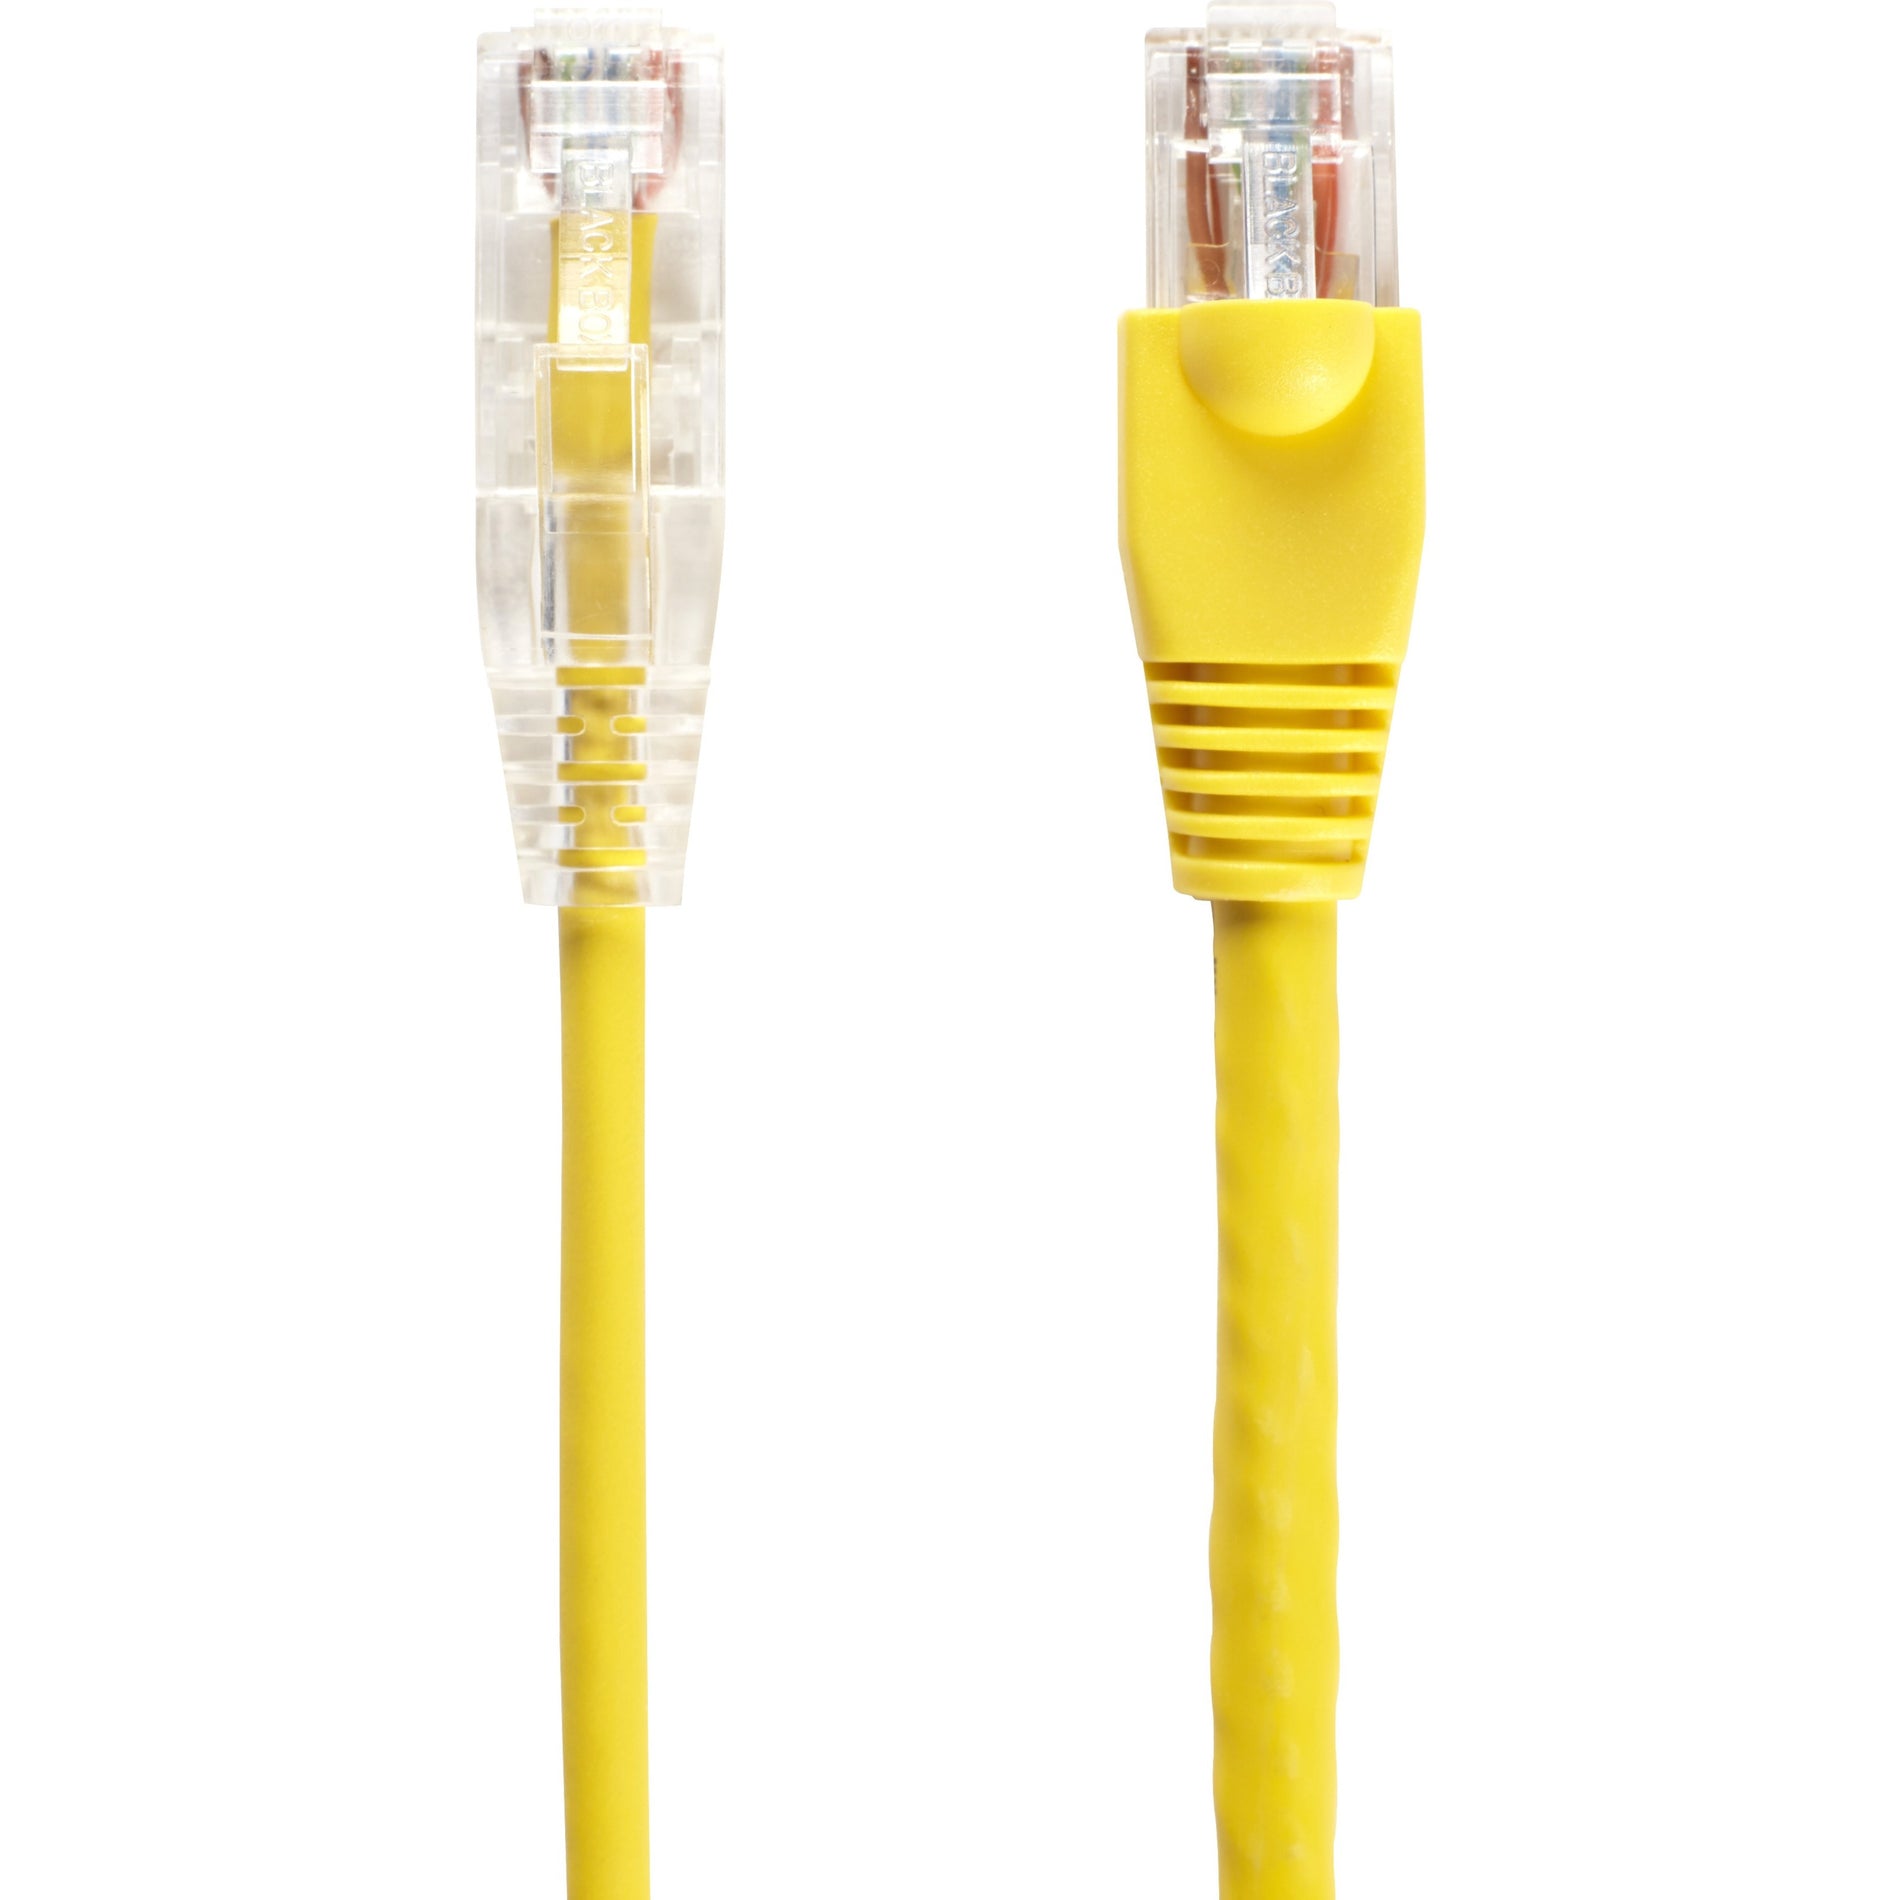 Black Box C6PC28-YL-01 Slim-Net Cat.6 UTP Patch Network Cable, 1 ft, 10 Gbit/s, Snagless Boot